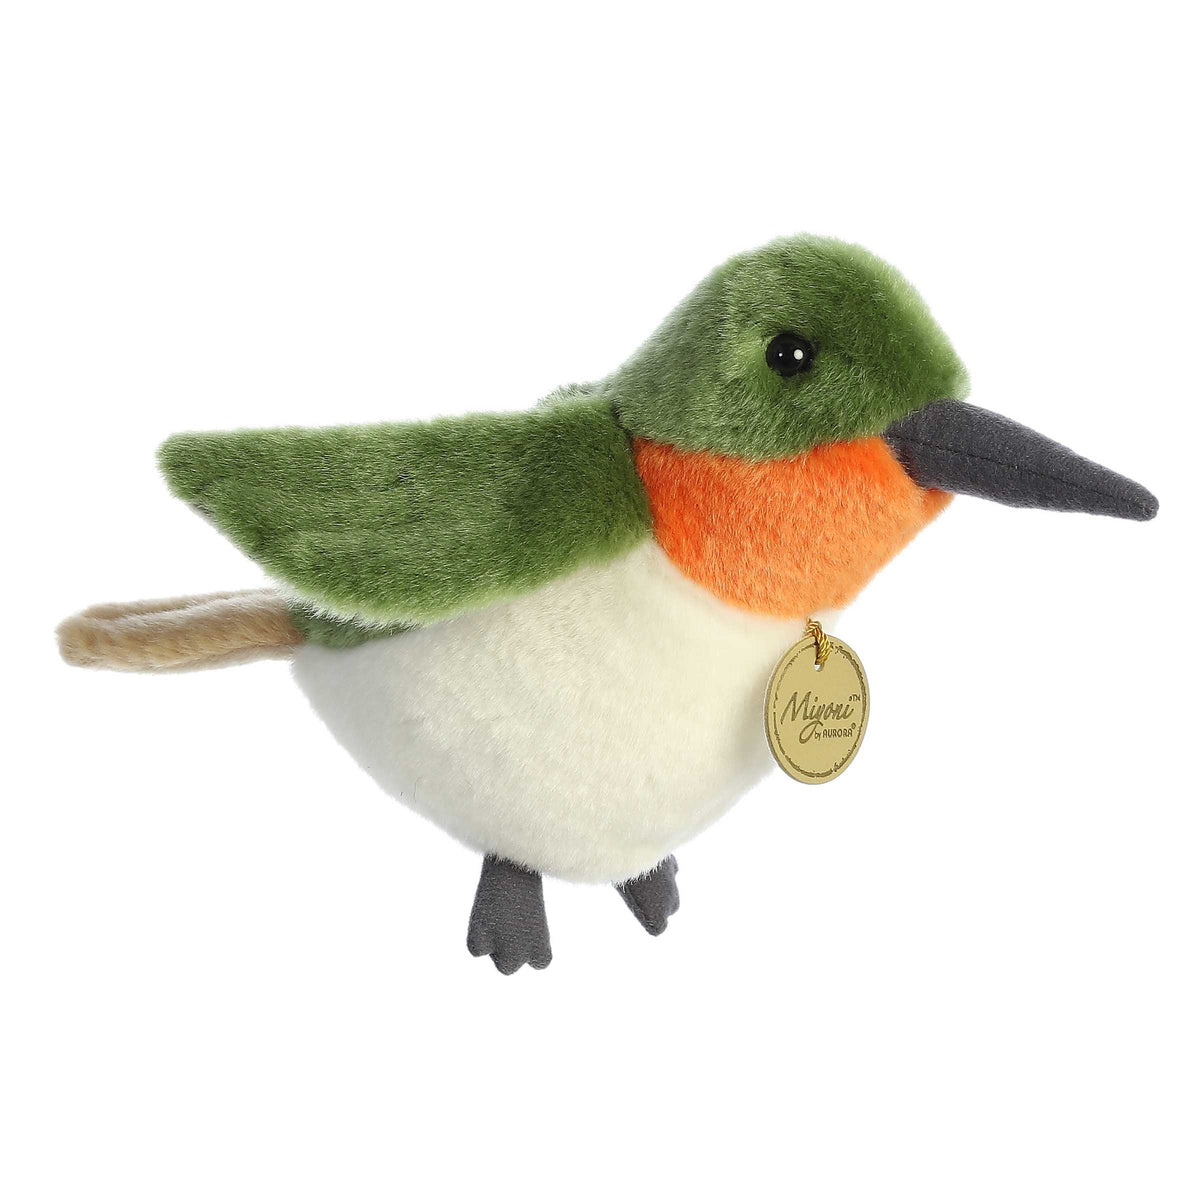 Iridescent green Ruby-Throated Hummingbird plush with a ruby-red throat, designed for realism and softness, by Aurora.